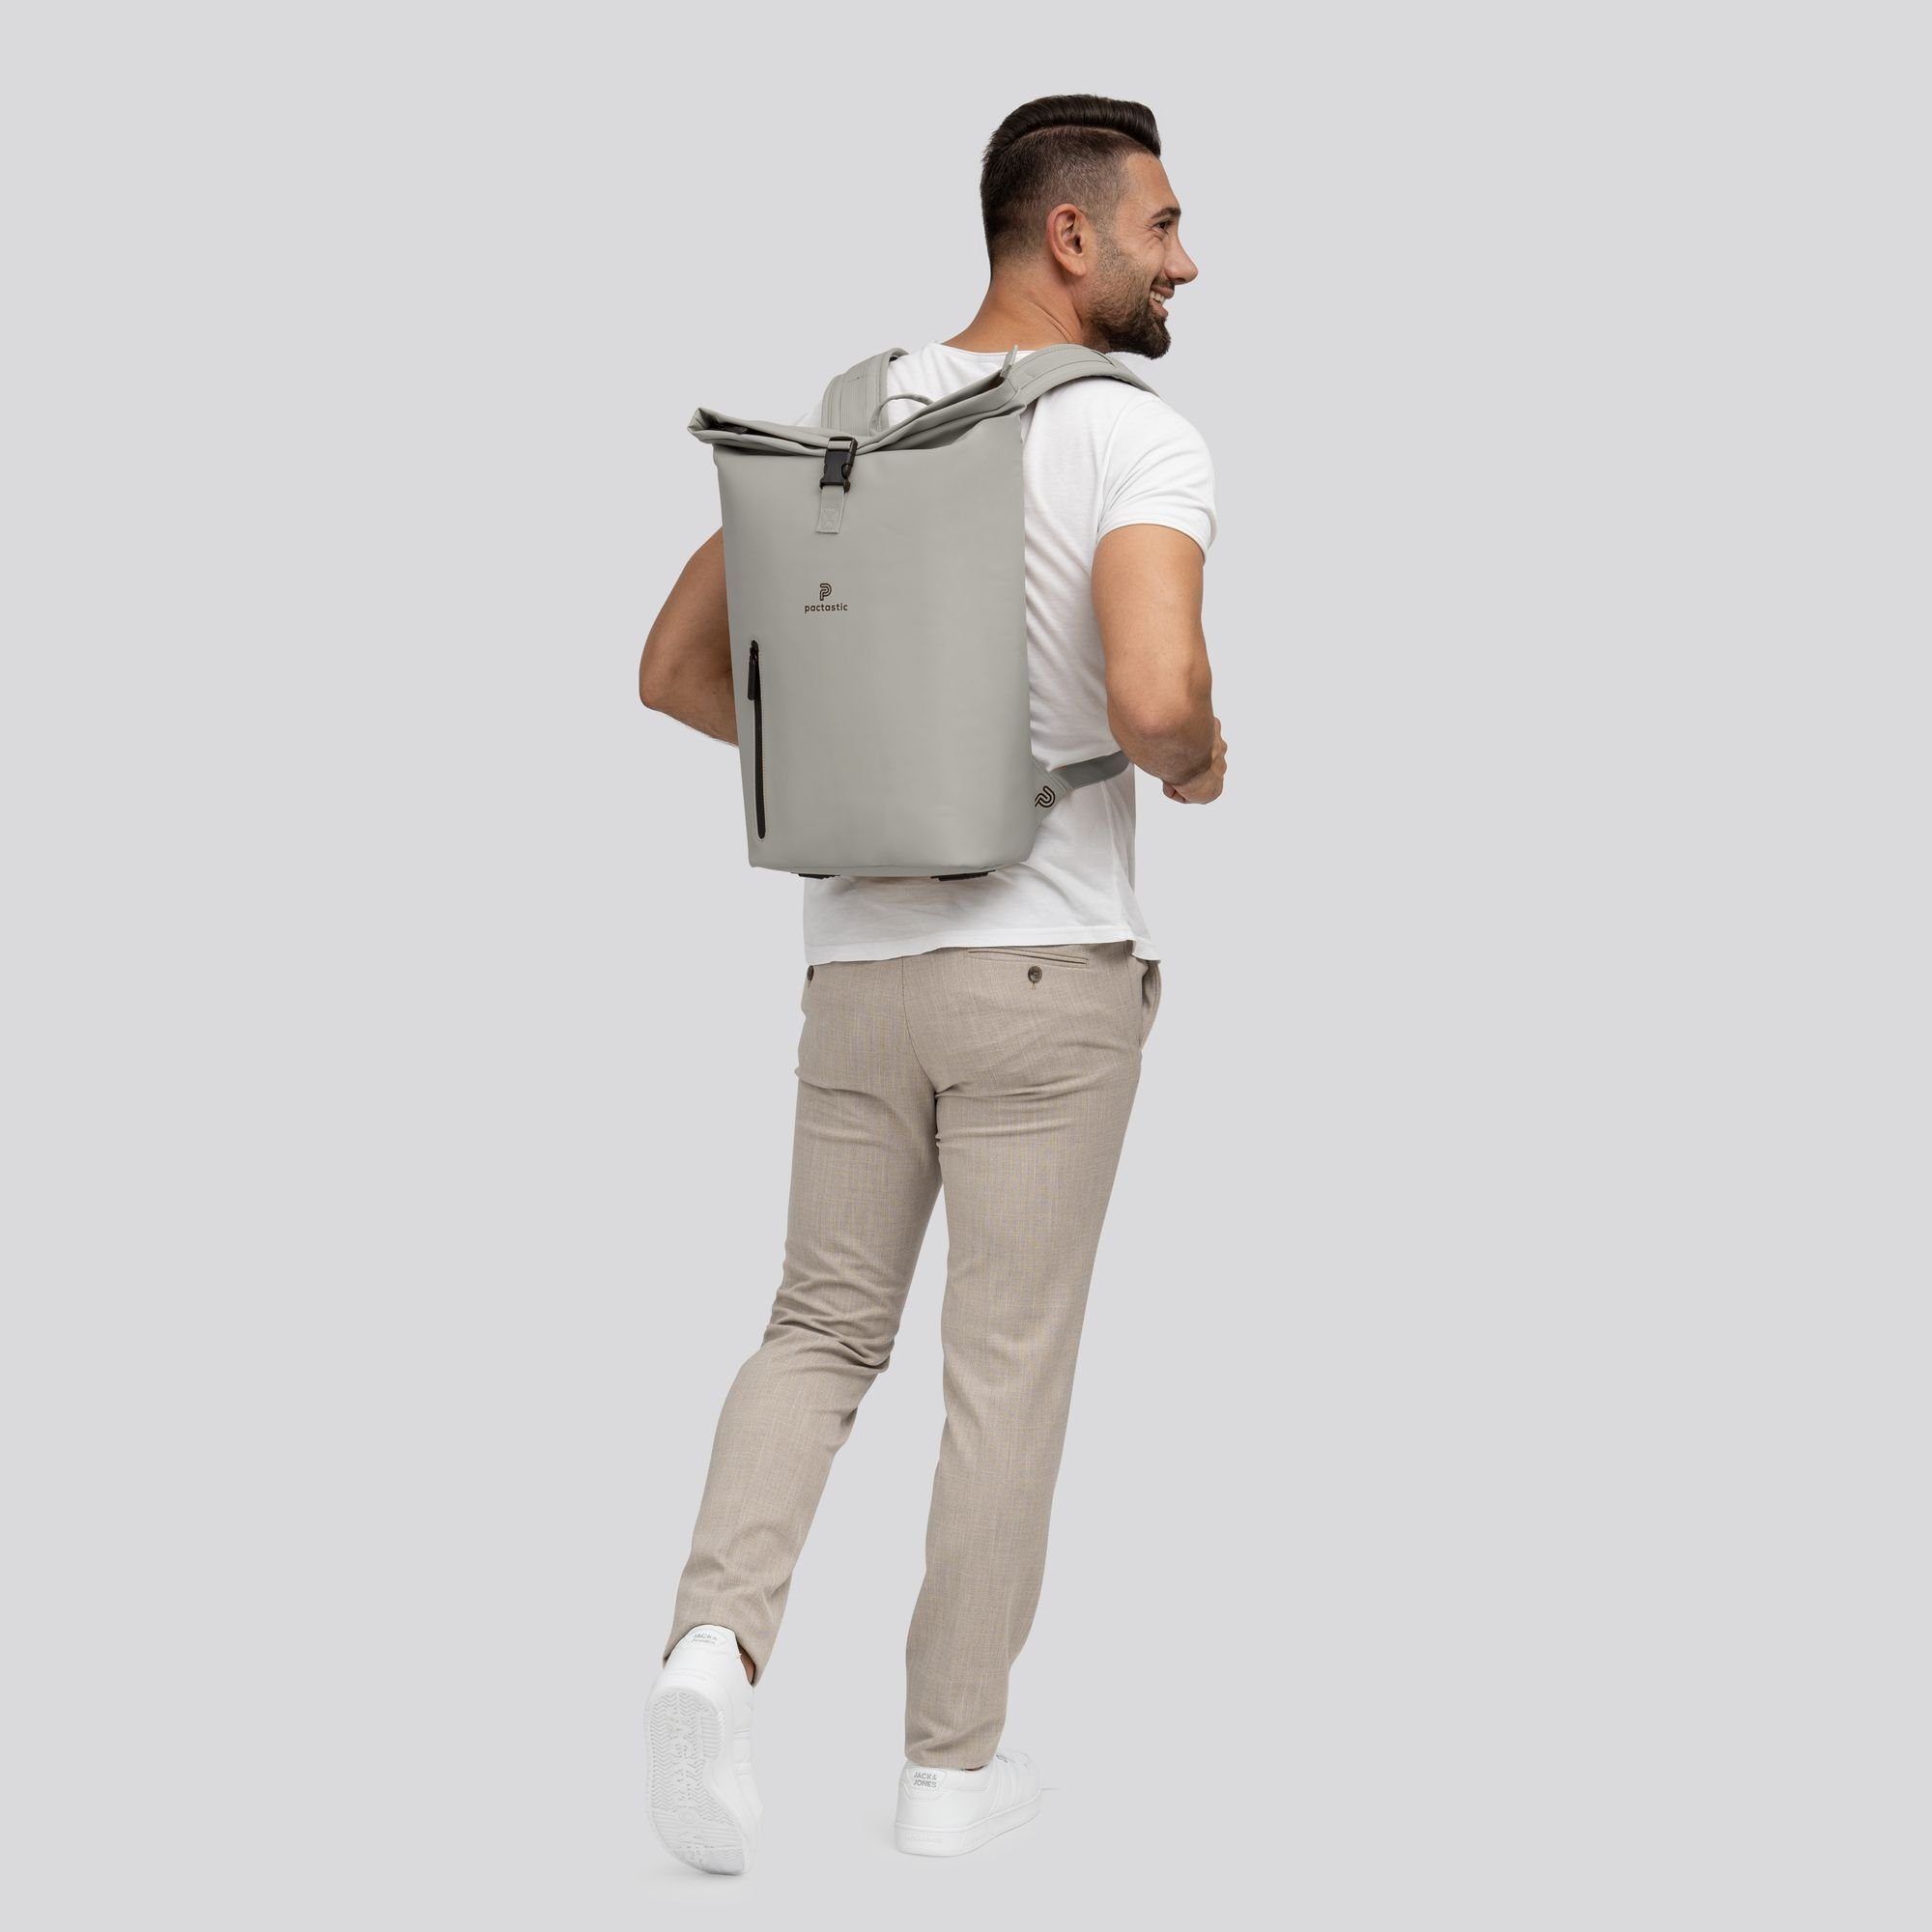 Daypack Veganes Tech-Material Collection, grey Pactastic Urban